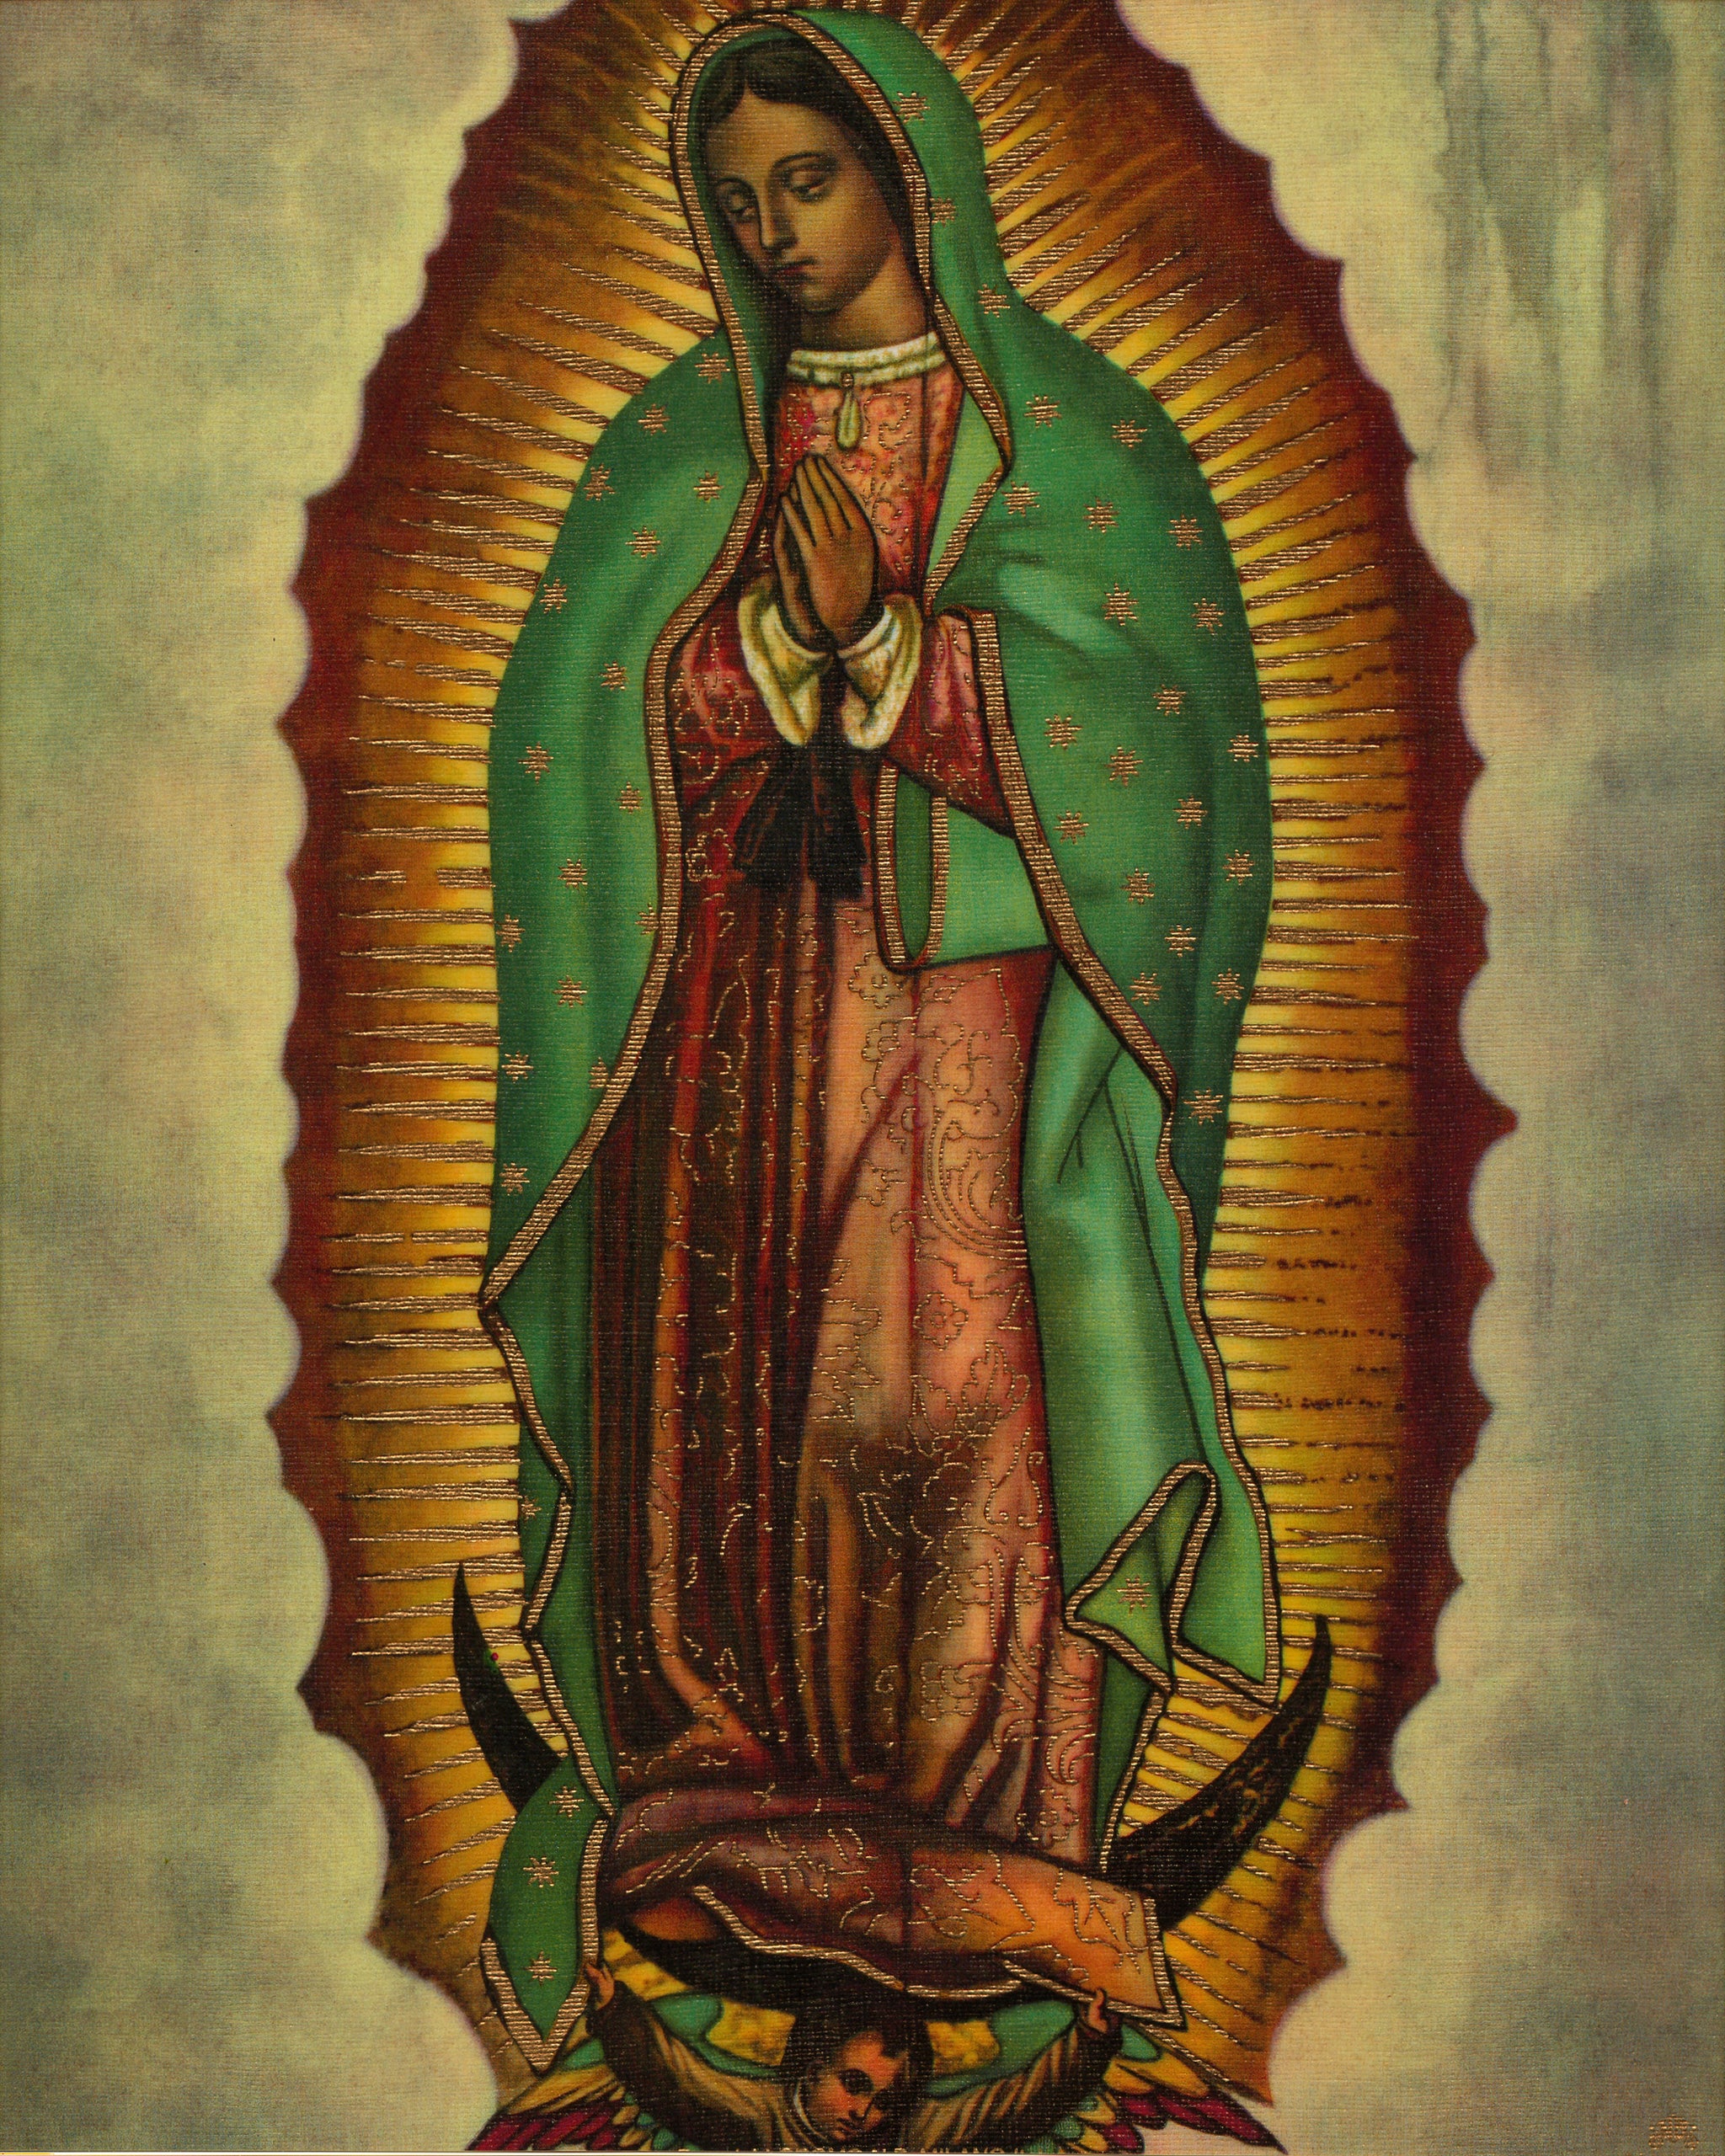 Our Lady Of Guadalupe Printable Image